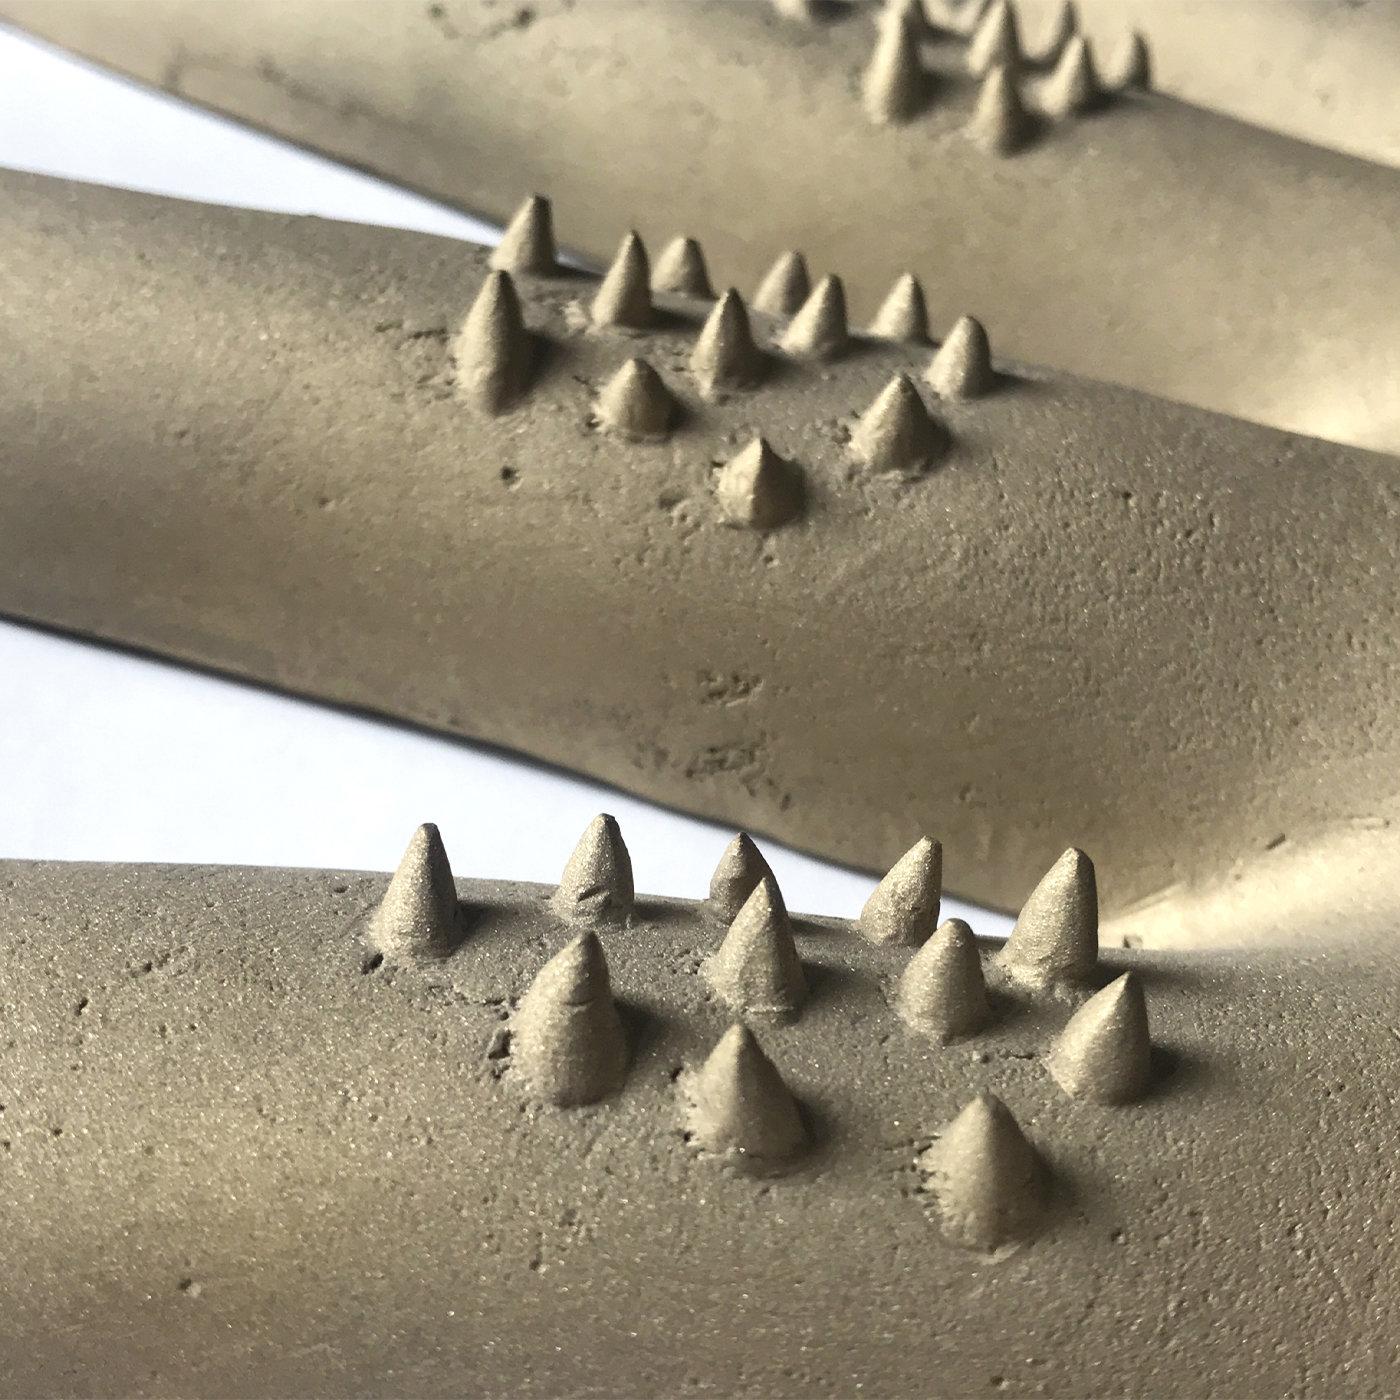 This work is crafted from brass using a lost wax casting technique, representing an image from the artist's memory and a vital fragment of the human form. Prominent spikes represent tiny hairs and create a tactile effect, bringing depth and texture